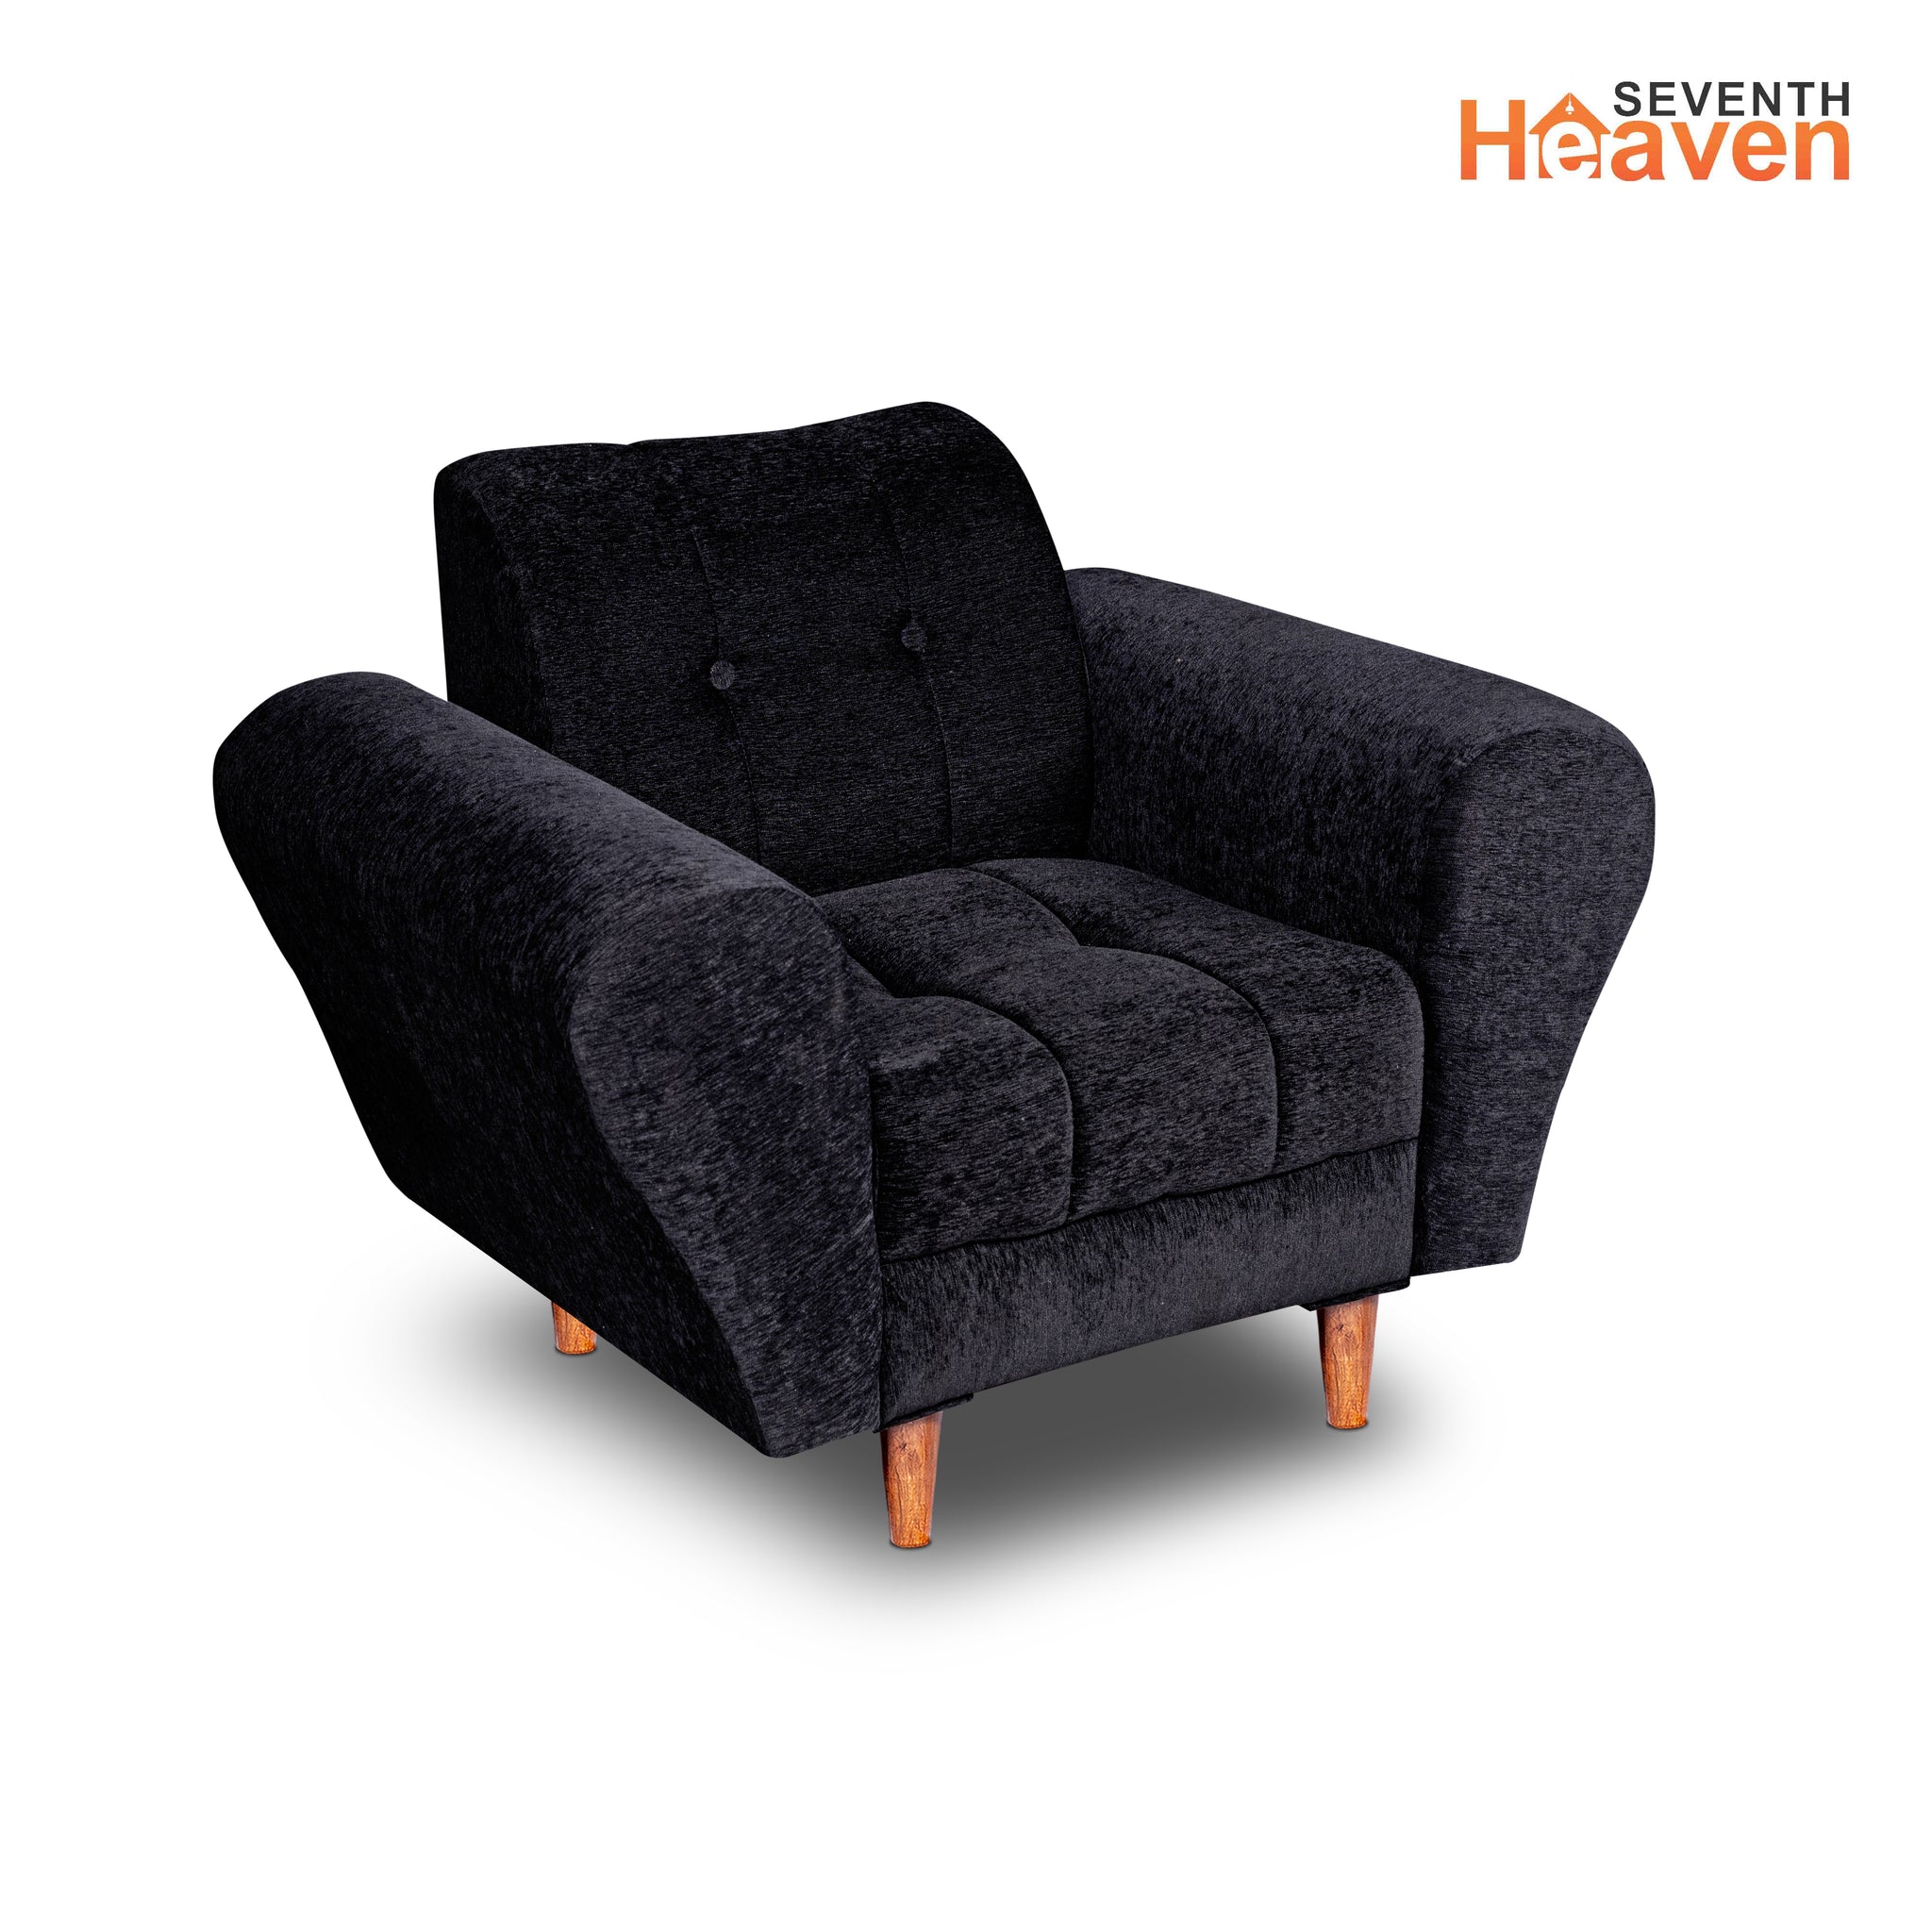 Seventh Heaven Milan 1 Seater Wooden Sofa Set Modern & Elegant Smart Furniture Range for luxurious homes, living rooms and offices. Black Colour Molphino fabric with sheesham polished wooden legs.